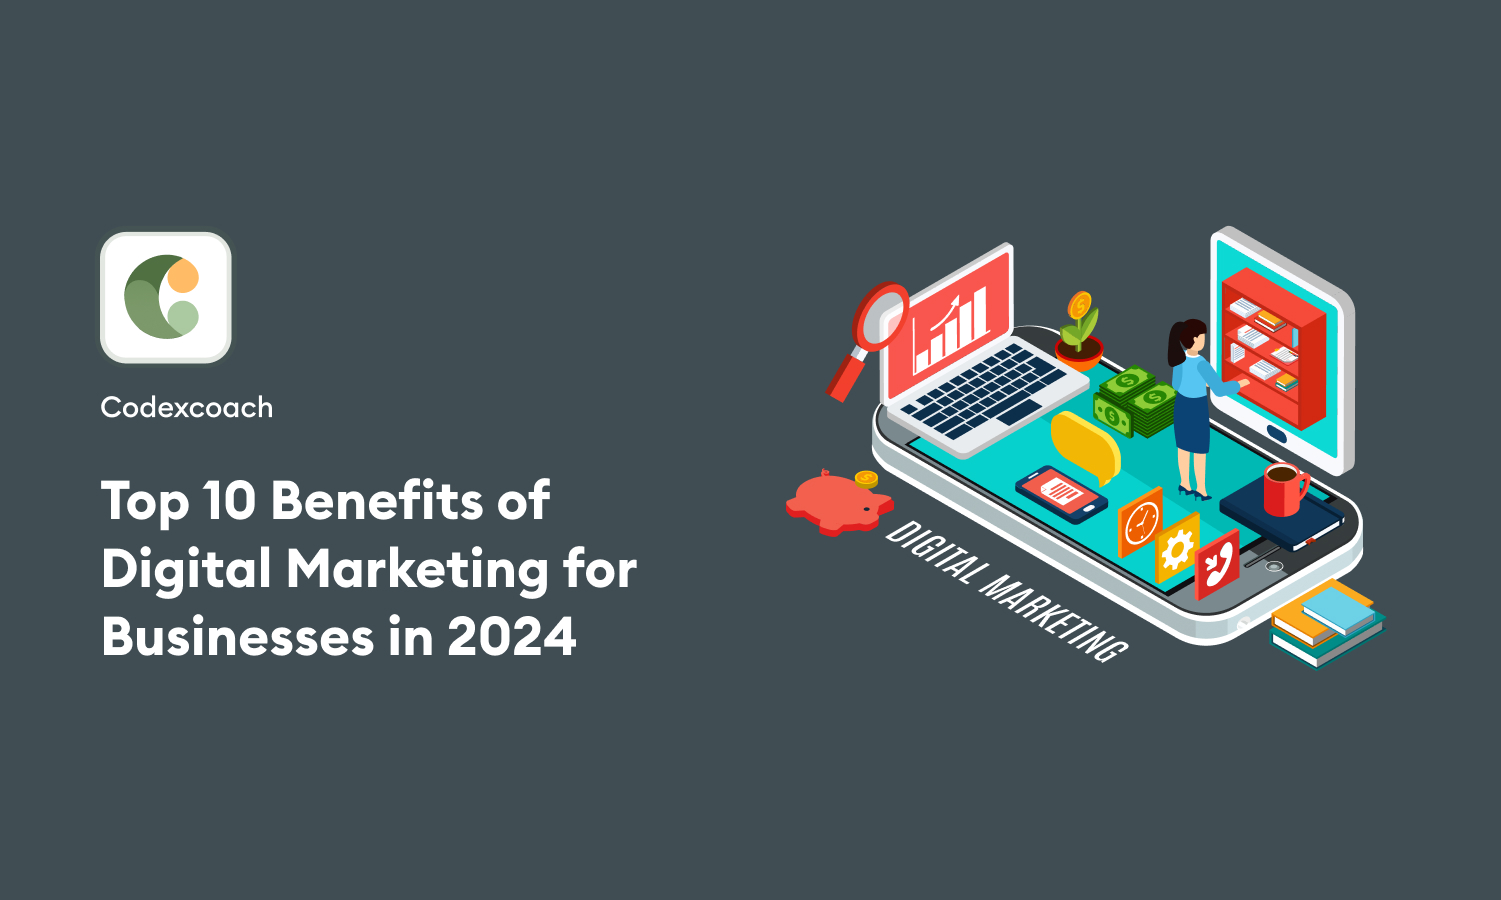 Top 10 Benefits of Digital Marketing for Businesses in 2024